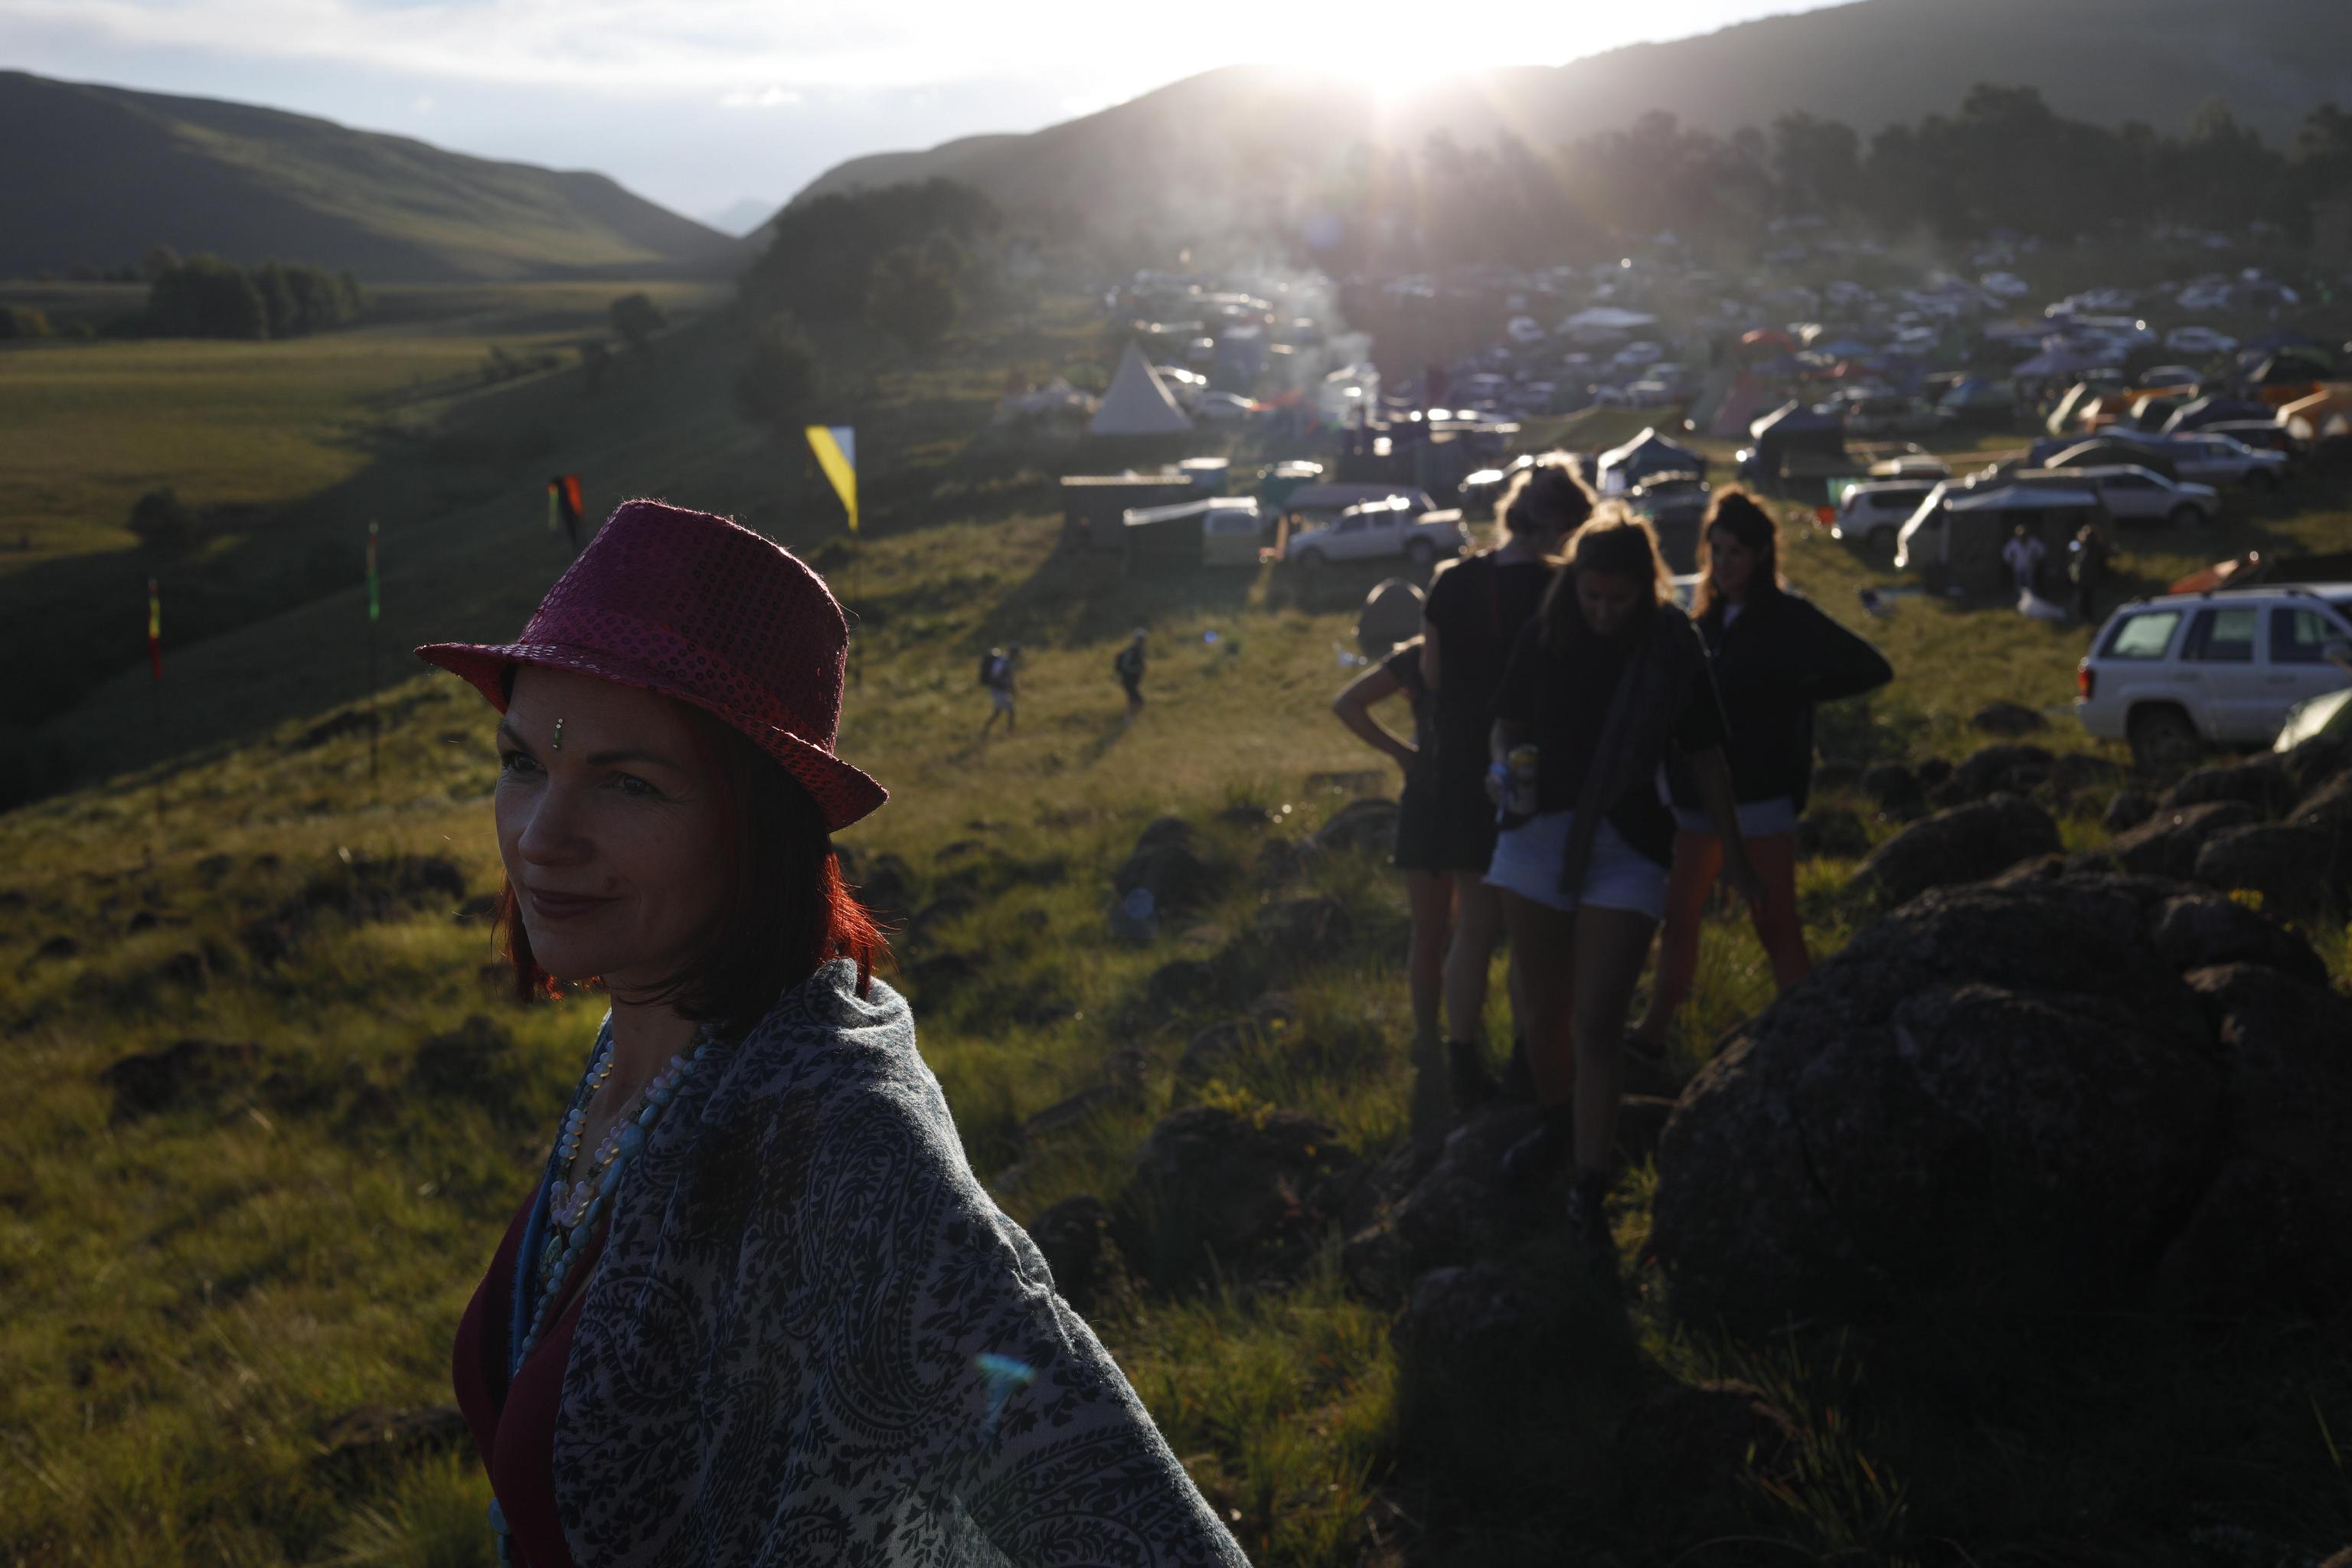 epa07514447 Festival goers during the annual Splashy Fen music festival in Underberg, South Africa, 18 April 2019. The five day long festival is the oldest in the country and is celebrating its 30 year. The festival has four stages with various music styles, morning yoga sessions, artworks, trail running, holistic lifestyle events, stalls etc.  EPA/KIM LUDBROOK